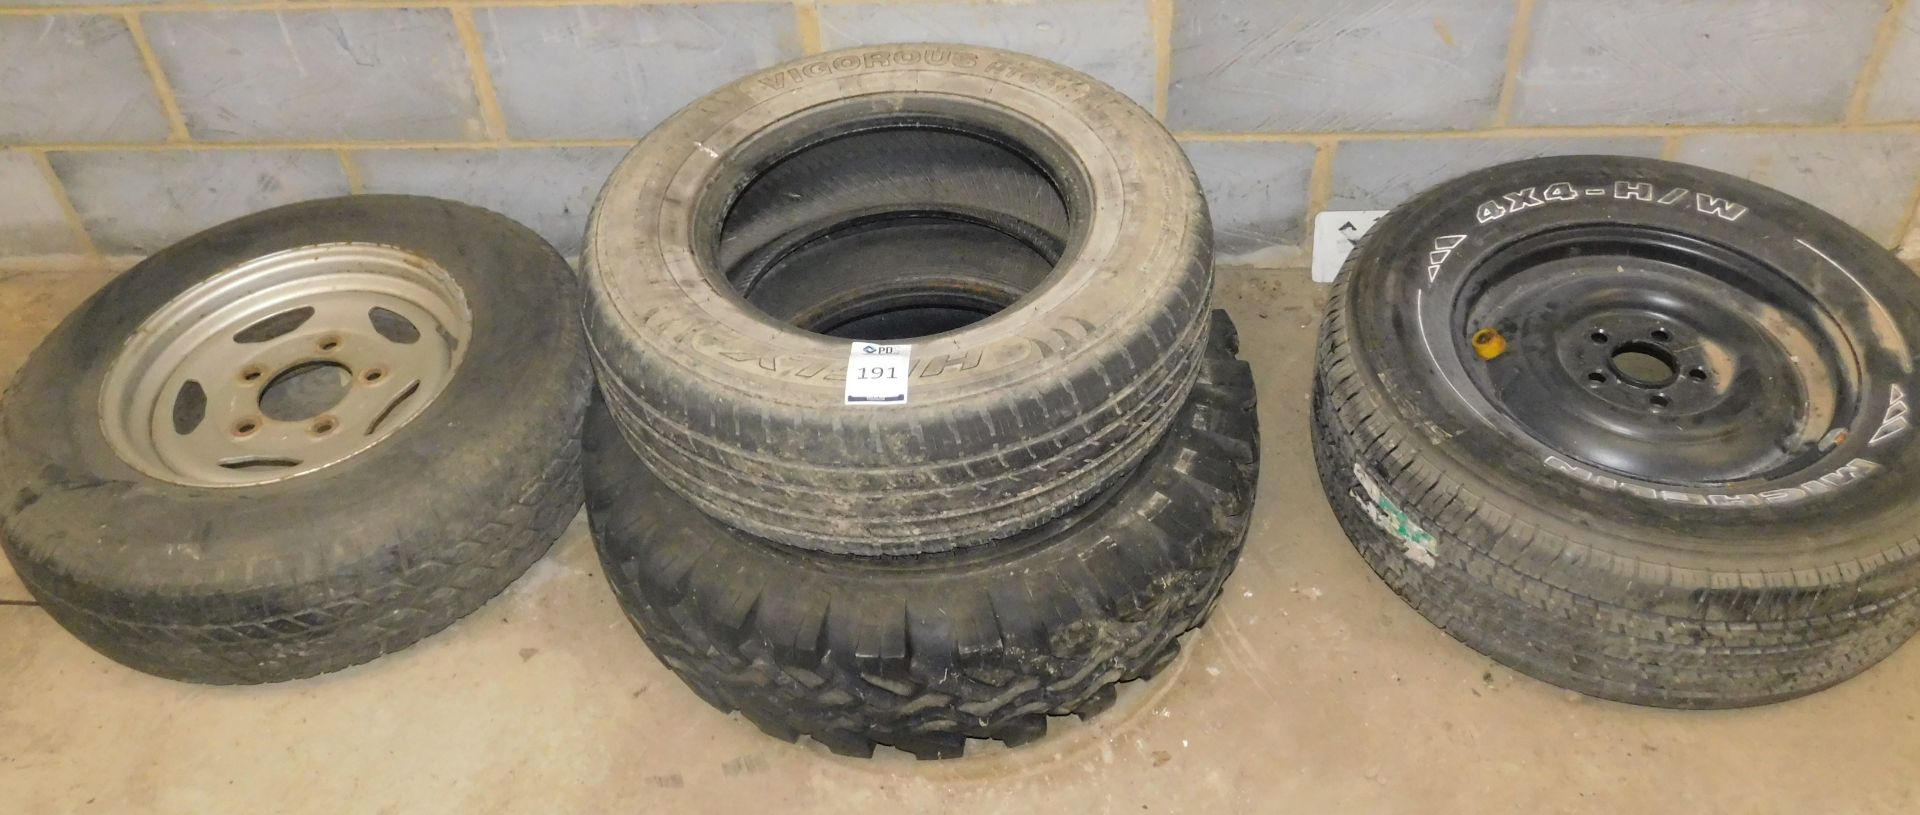 2 Wheels & 2 Tyres (Location Ashford, Kent. Please Refer to General Notes)